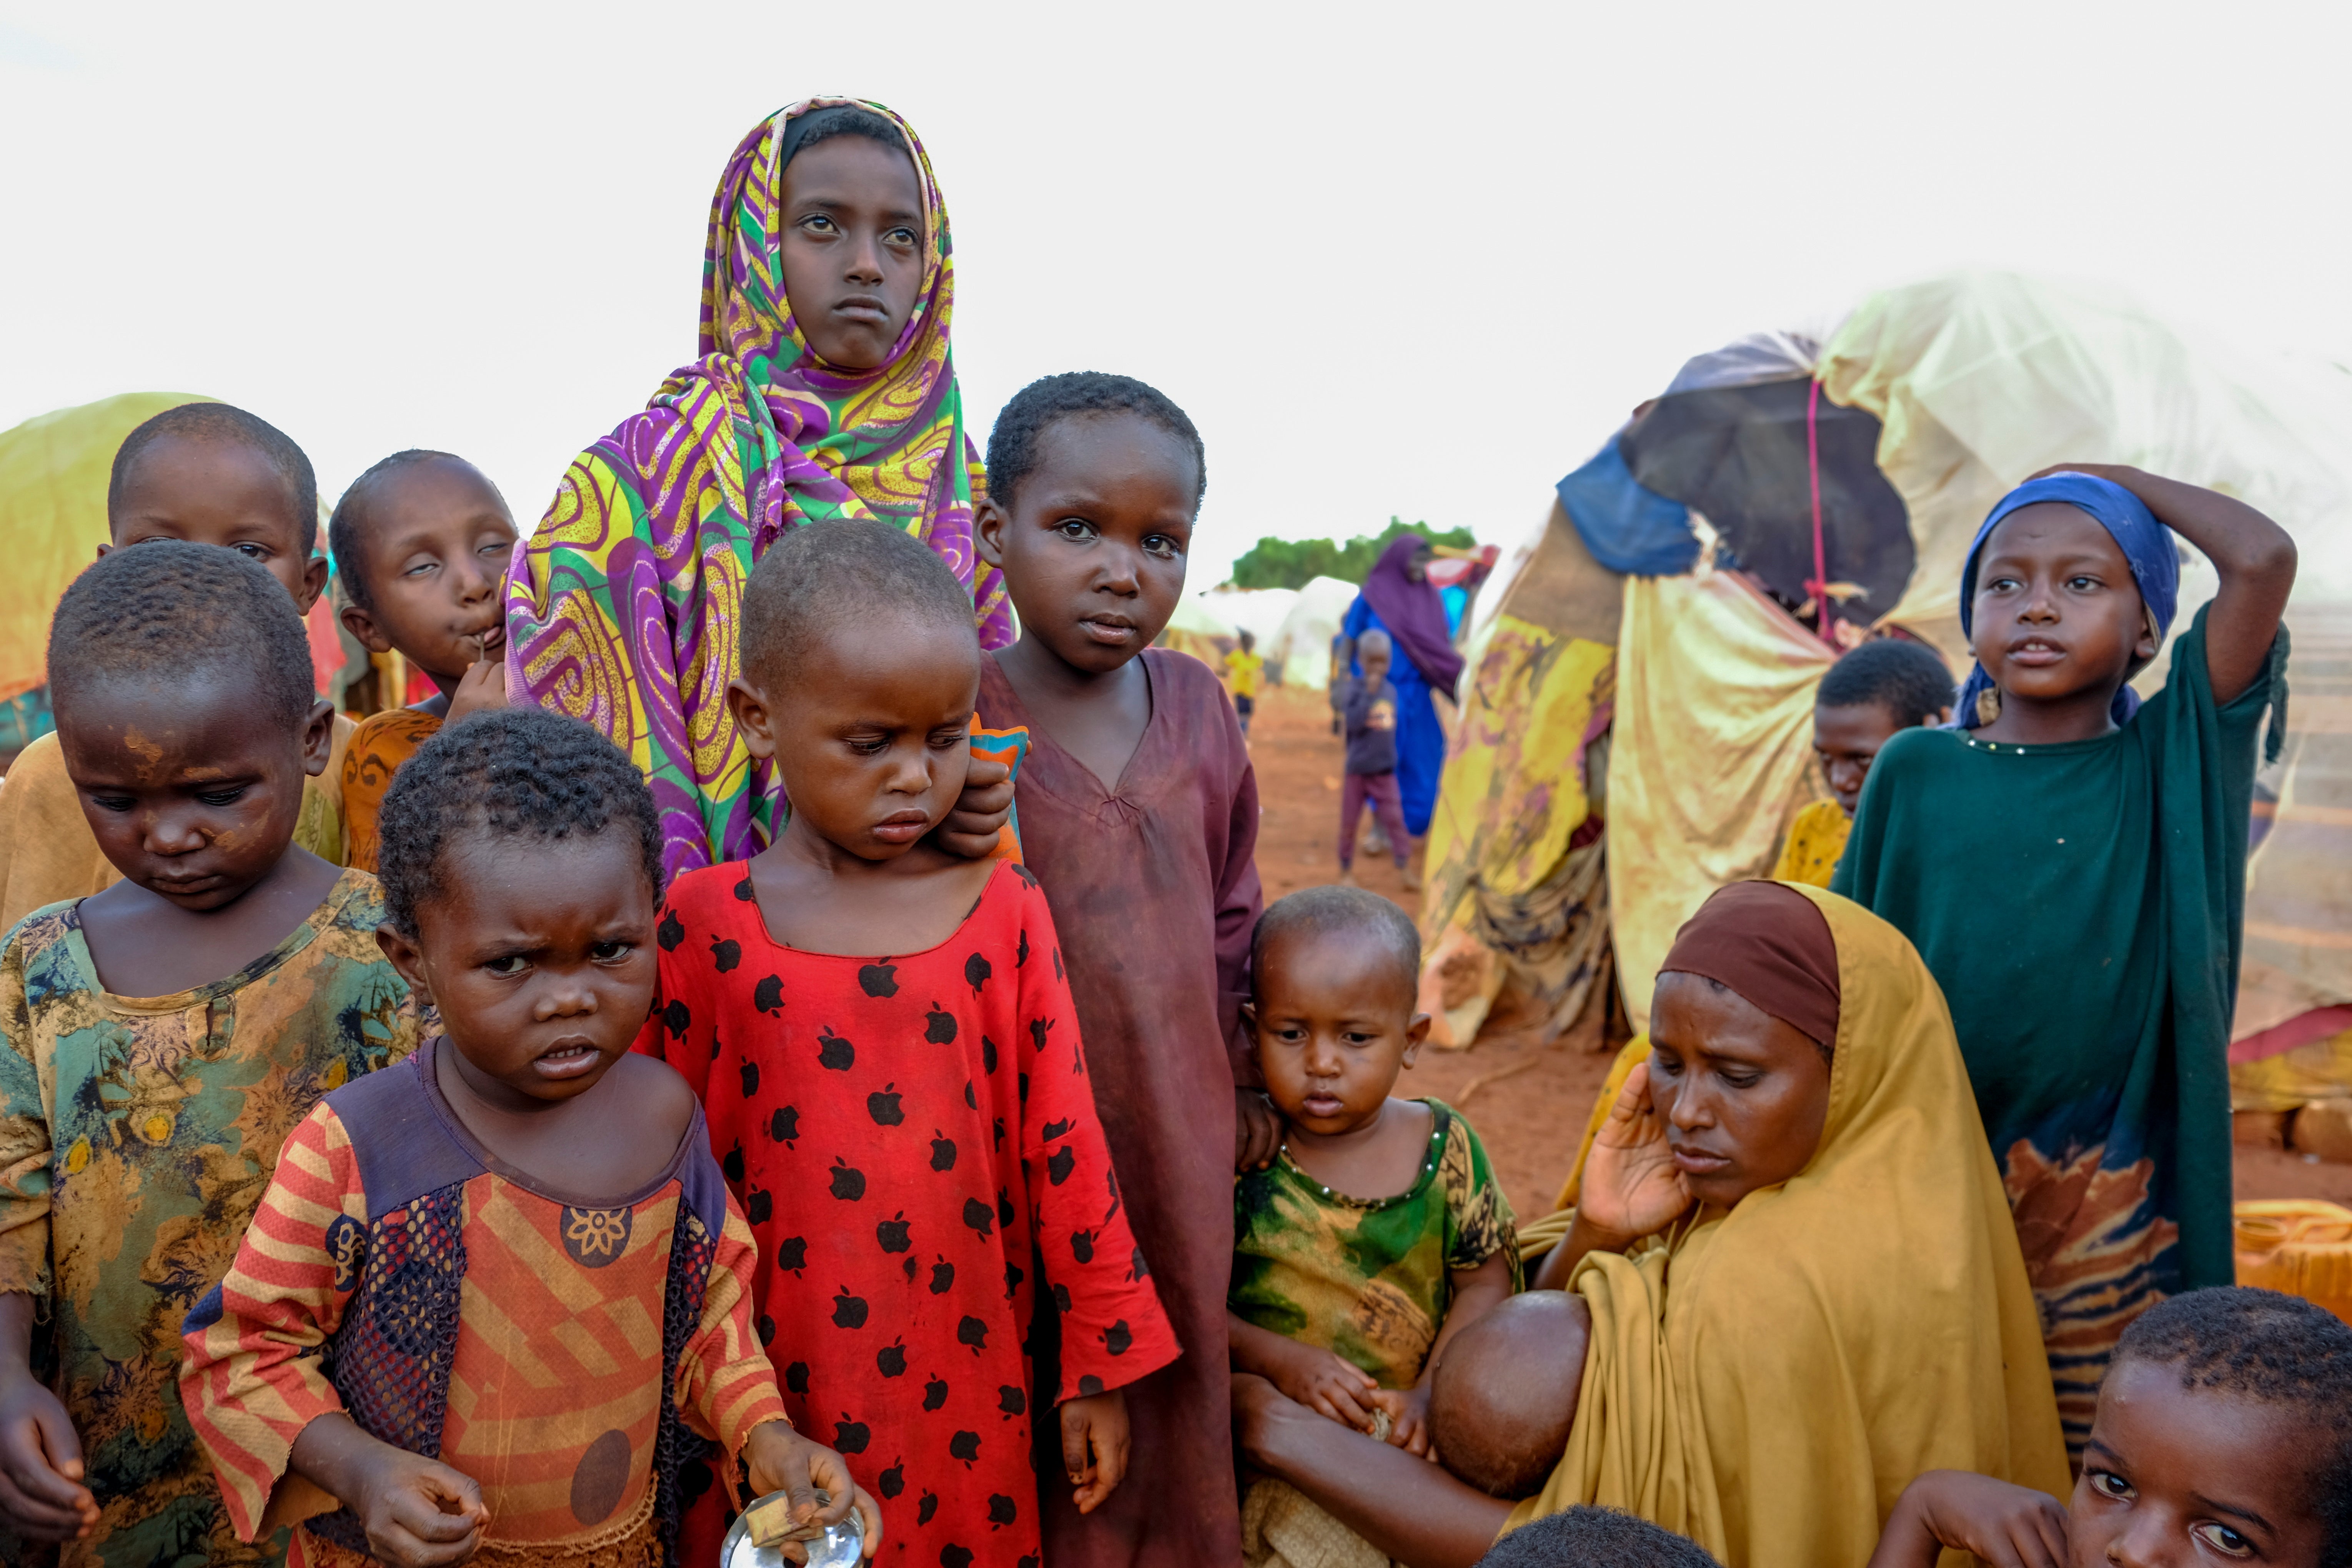 A mother and children displaced by drought in Somalia in October 2022